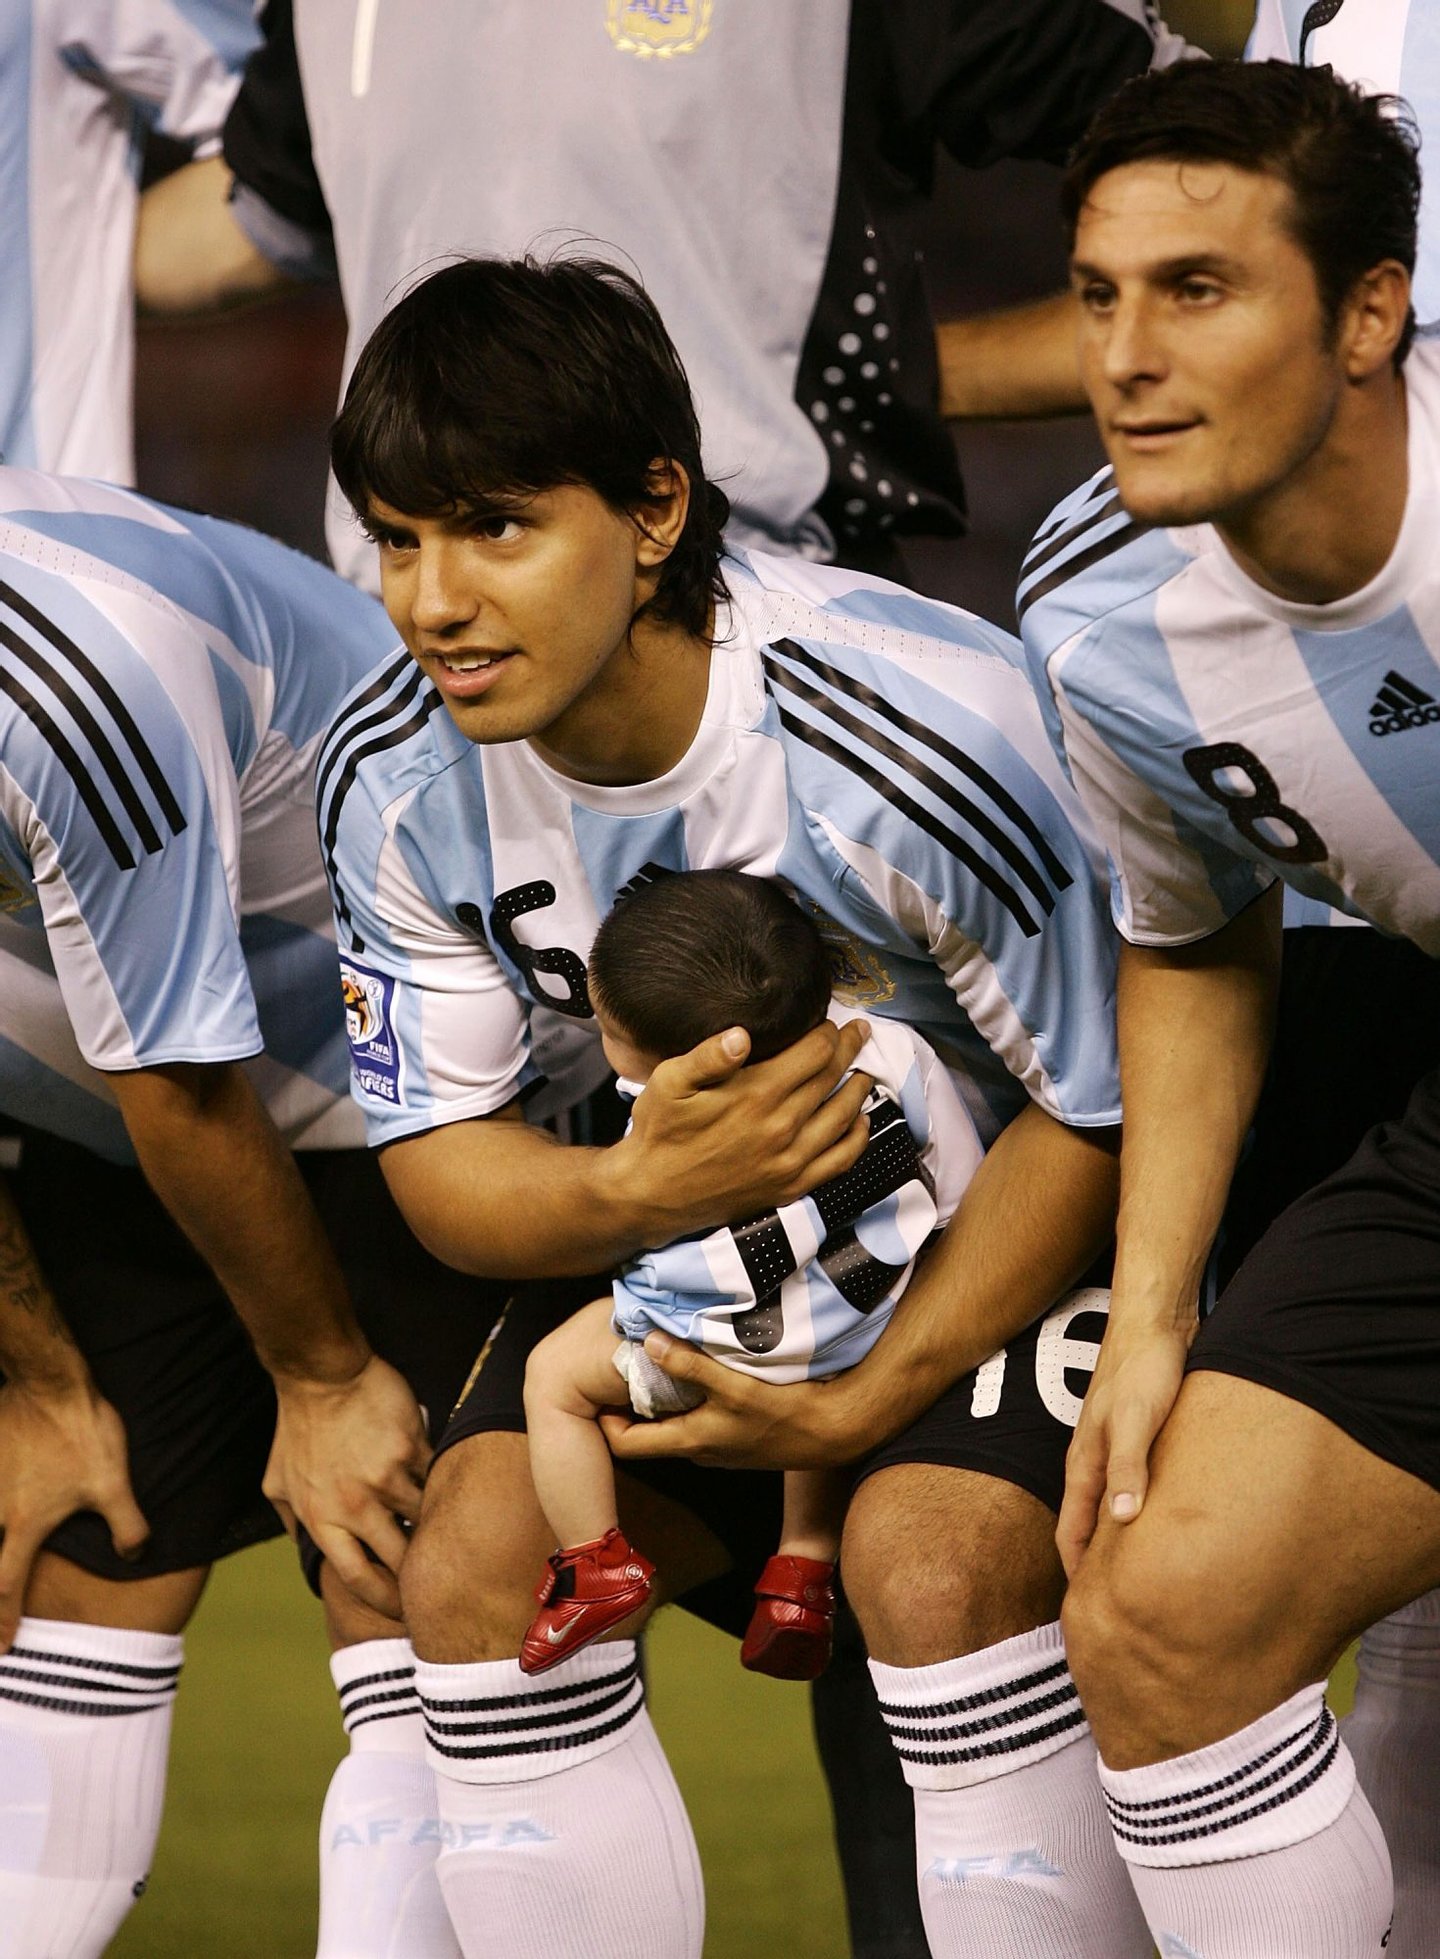 BUENOS AIRES, ARGENTINA - MARCH 28: Sergio Aguero of Argentina poses for photographs with his son Benjamin prior to the 2010 FIFA World Cup South African qualifier match between Argentina and Venezuela at River Plate Stadium on March 28, 2009 in Buenos Aires, Argentina. (Photo by Photogamma/Getty Images)